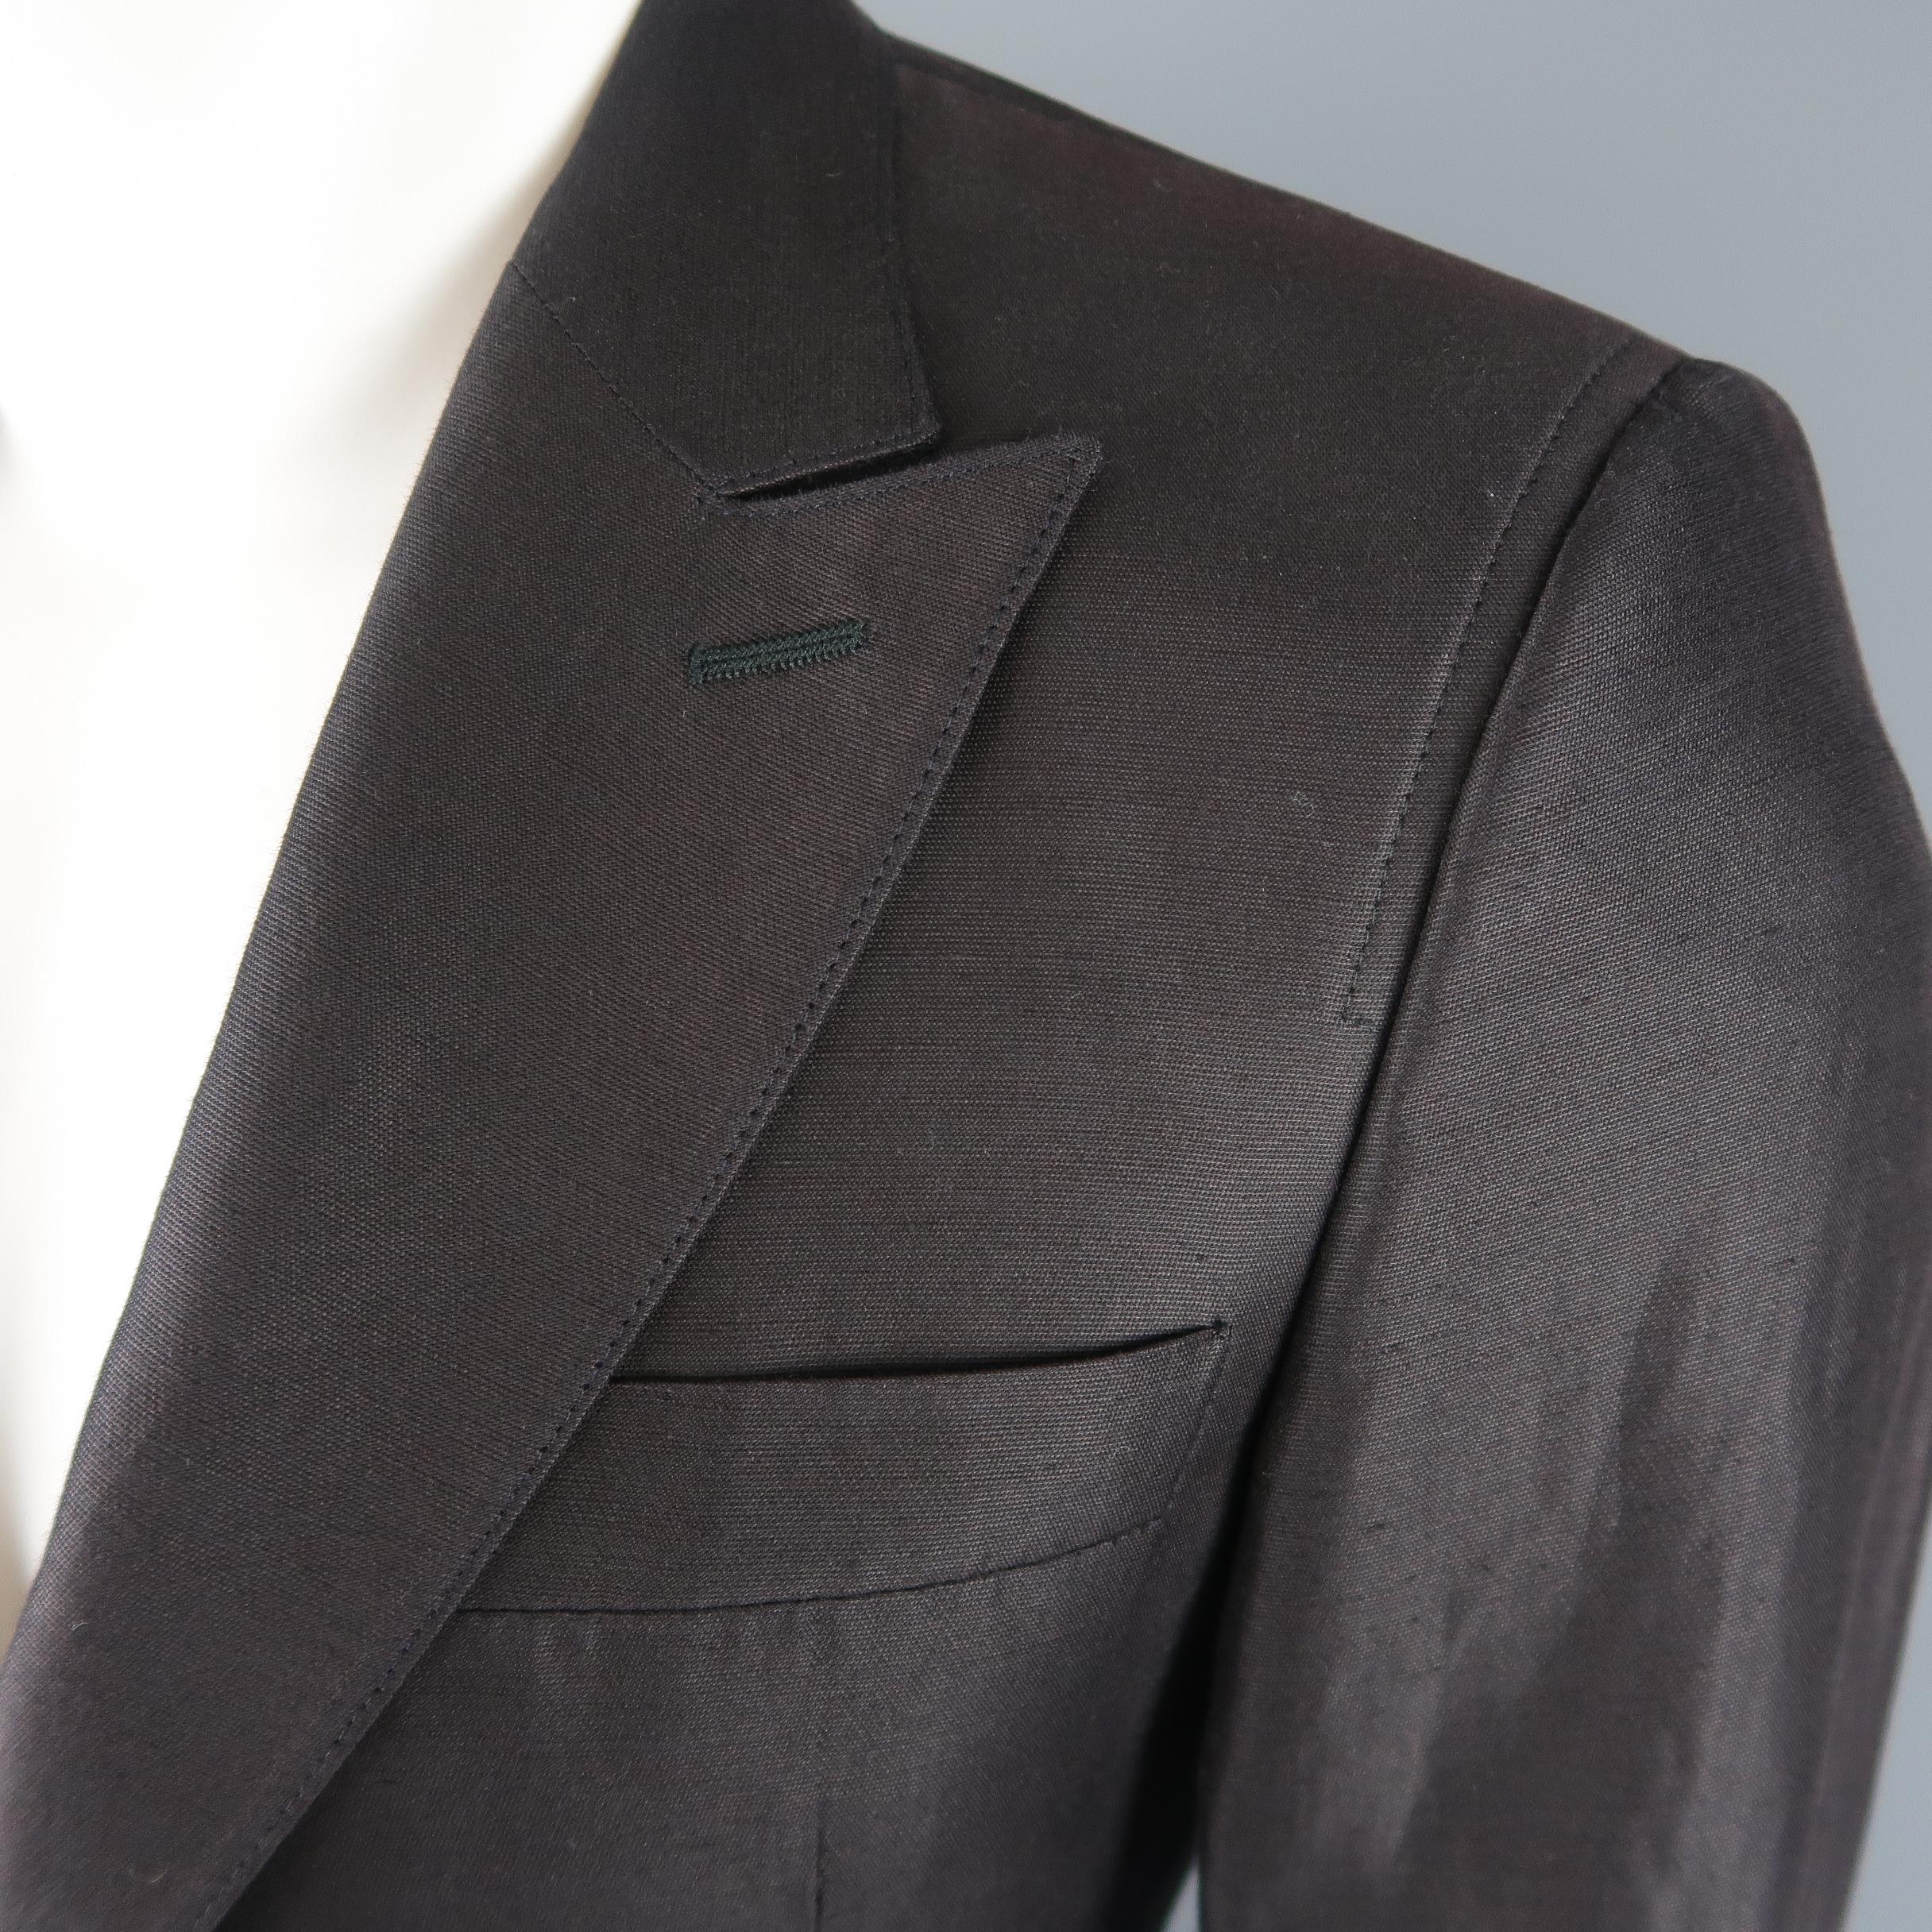 Single breasted COSTUME NATIONAL sport coat comes in a shiny cotton blend material with a peak lapel, top stitching, two button front, and hidden placket button cuff sleeves. Made in Italy.
 
Good Pre-Owned Condition.
Marked: (no size)
